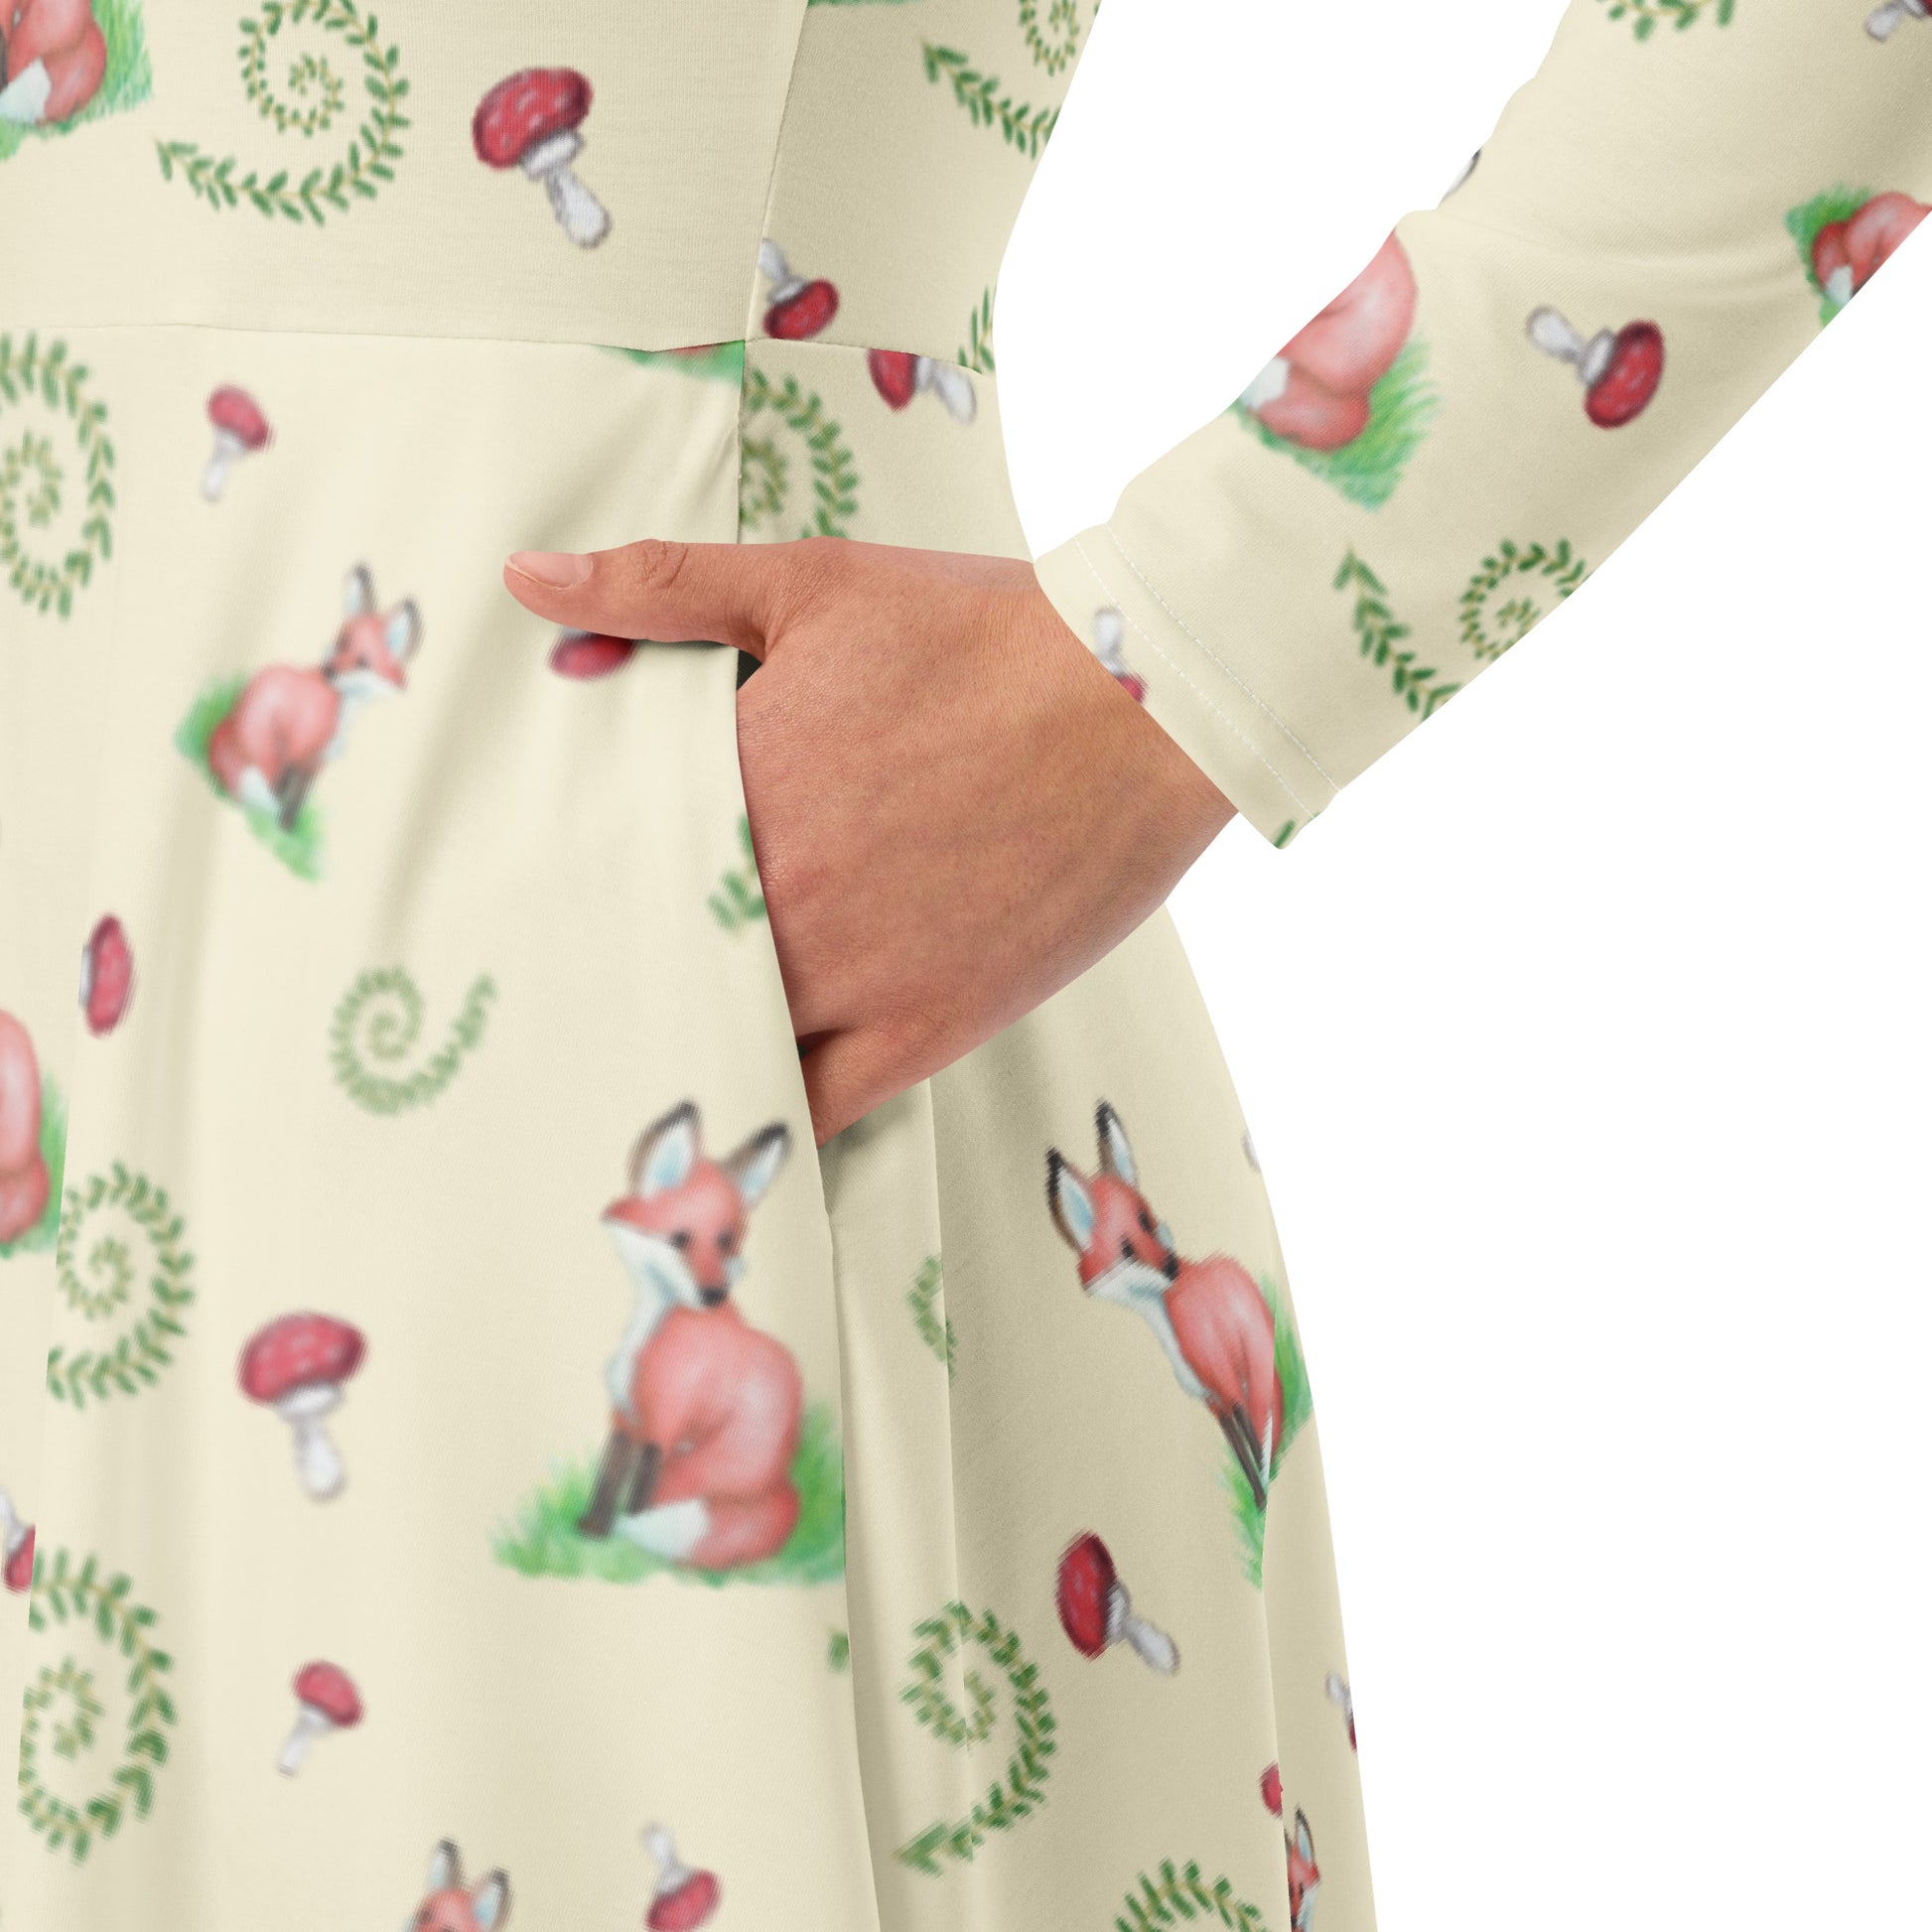 Fox pattern long sleeve midi dress with side pockets, fitted waist, and flared bottom. Foxes, ferns, and mushrooms are patterned on the apricot white fabric. Soft and comfortable. Detail image of model's hand in a side pocket.